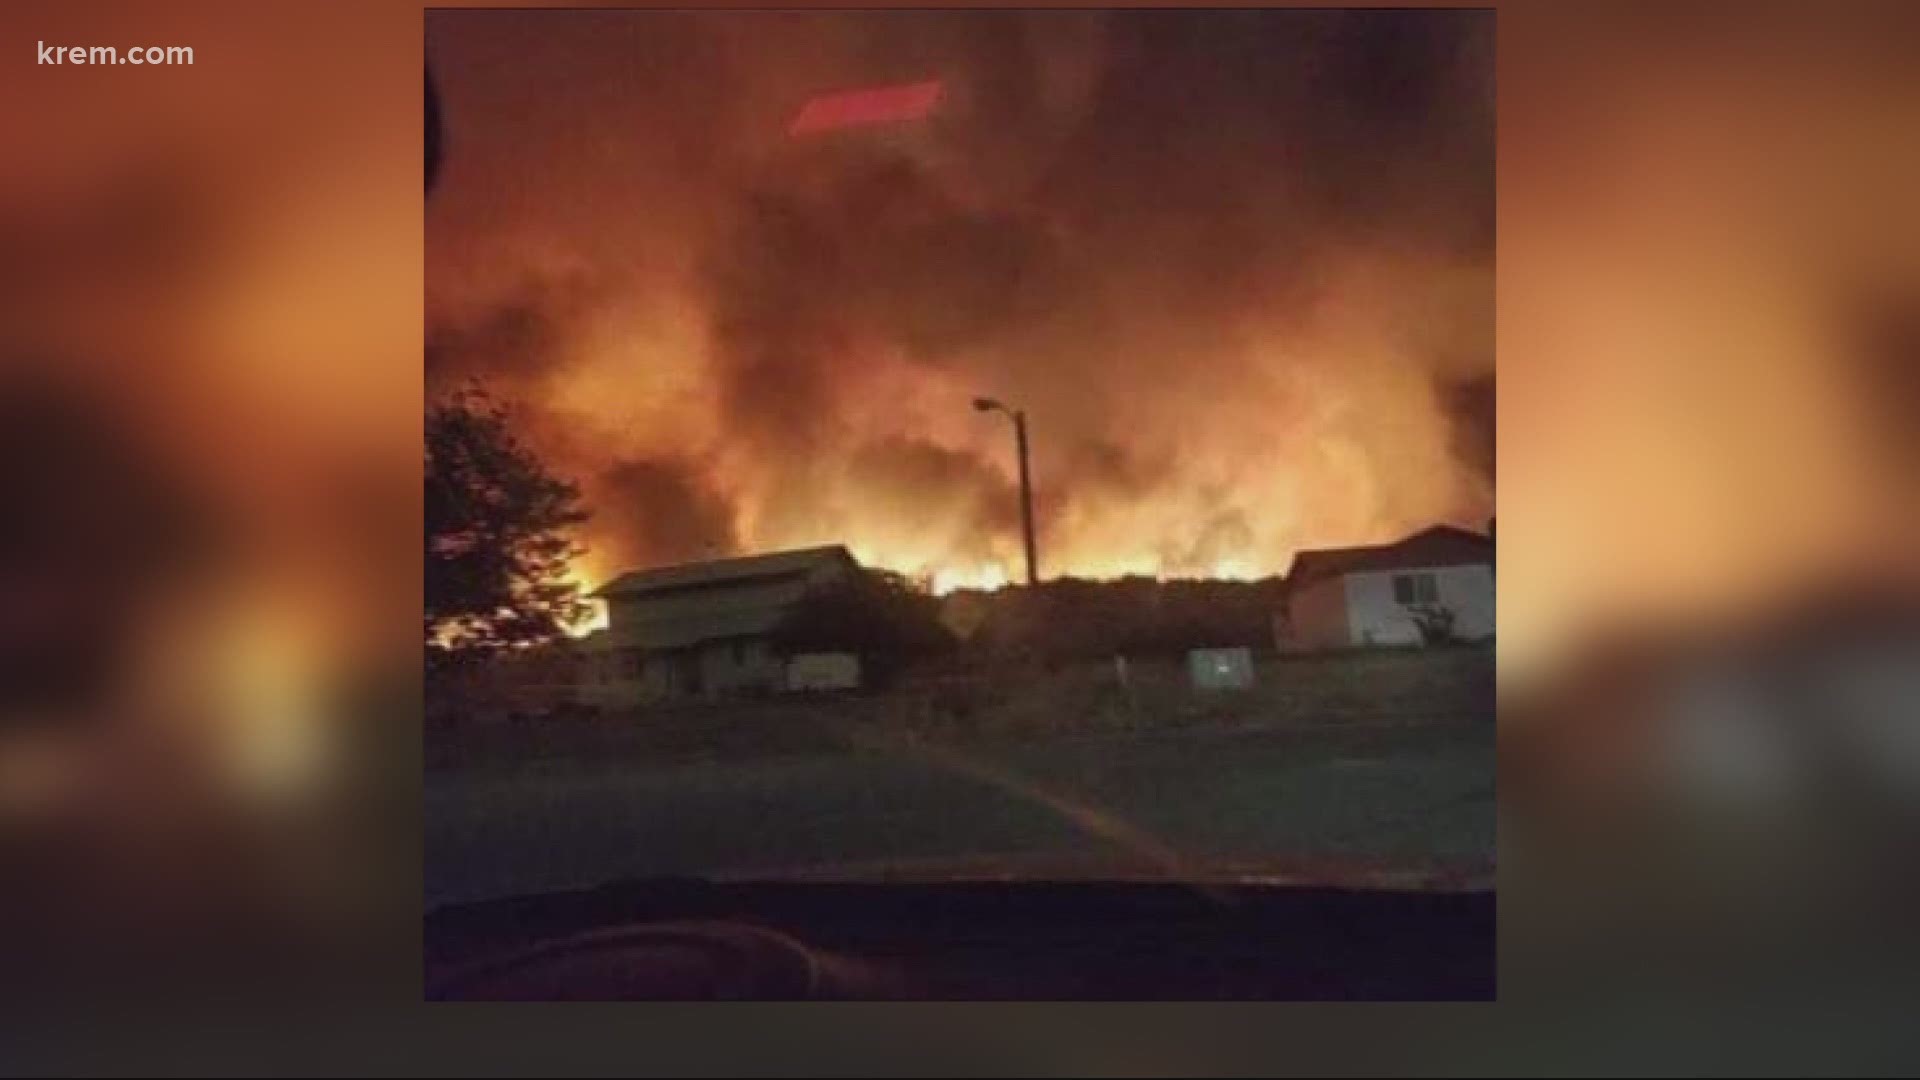 McDonald's home and the homes of two of her neighbors in Malott were lost earlier this week as flames from the fast moving fire approached McDonald's subdivision.